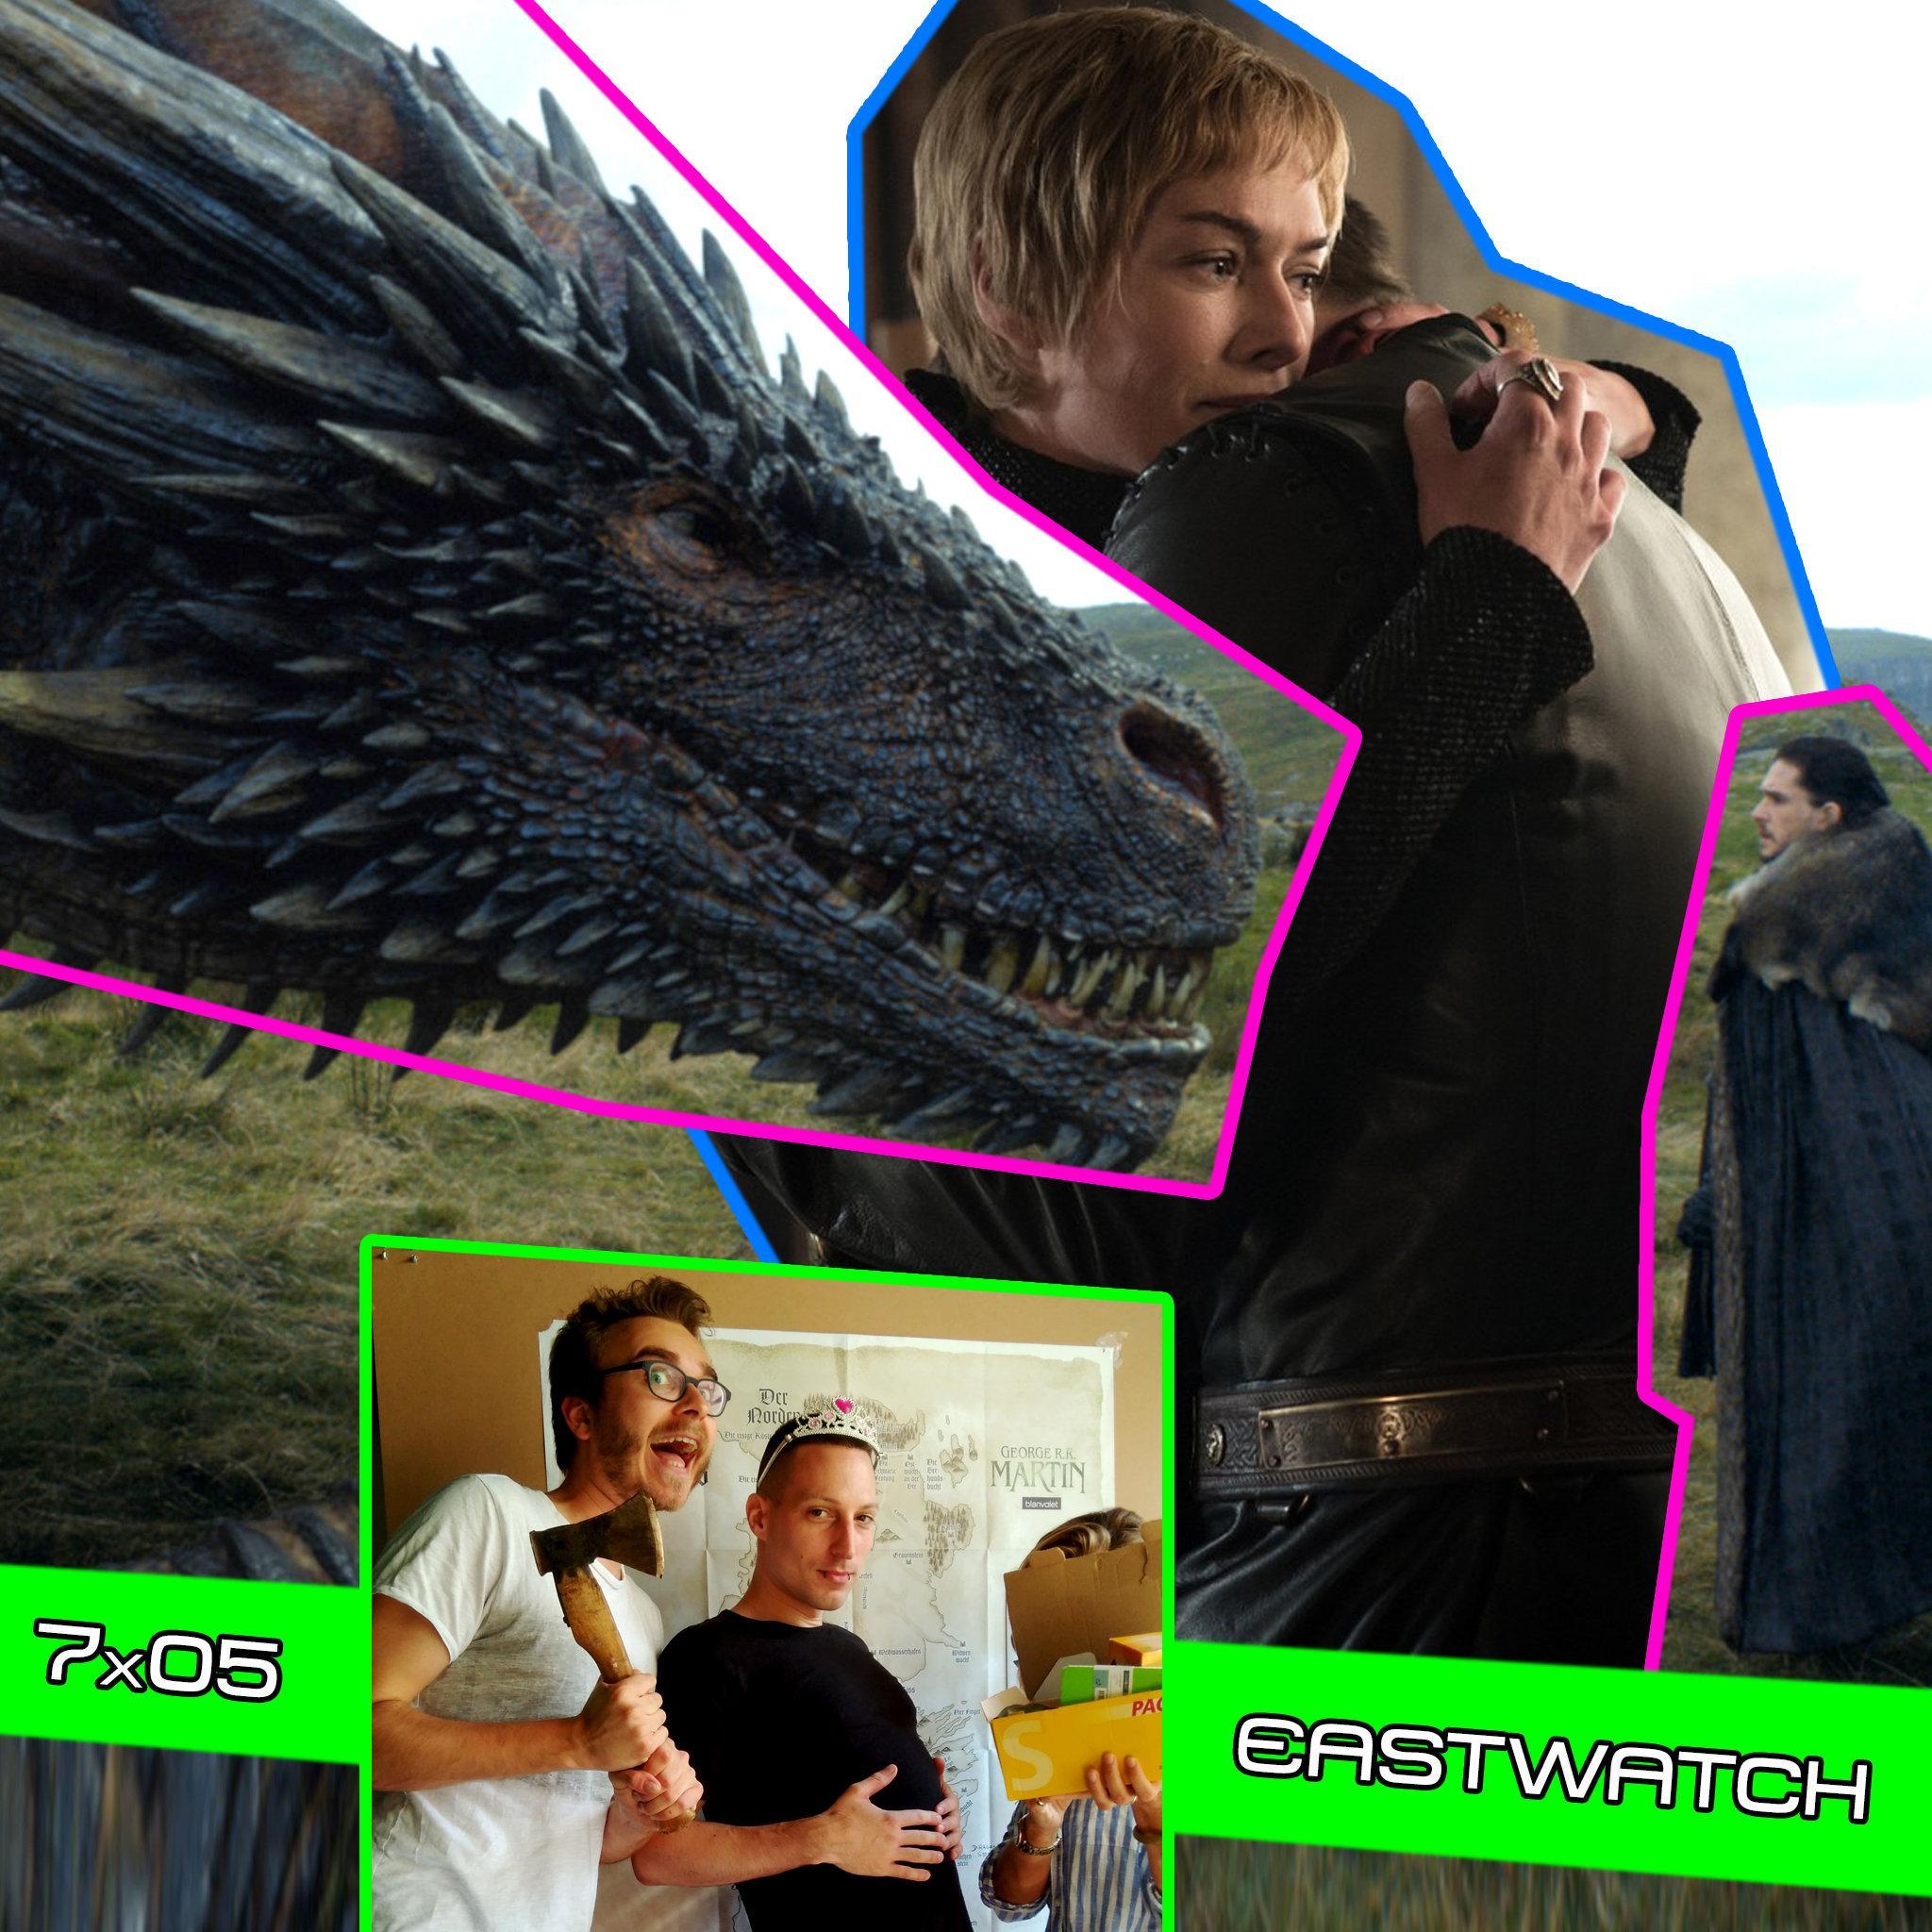 Game of Thrones 7x05 - Eastwatch